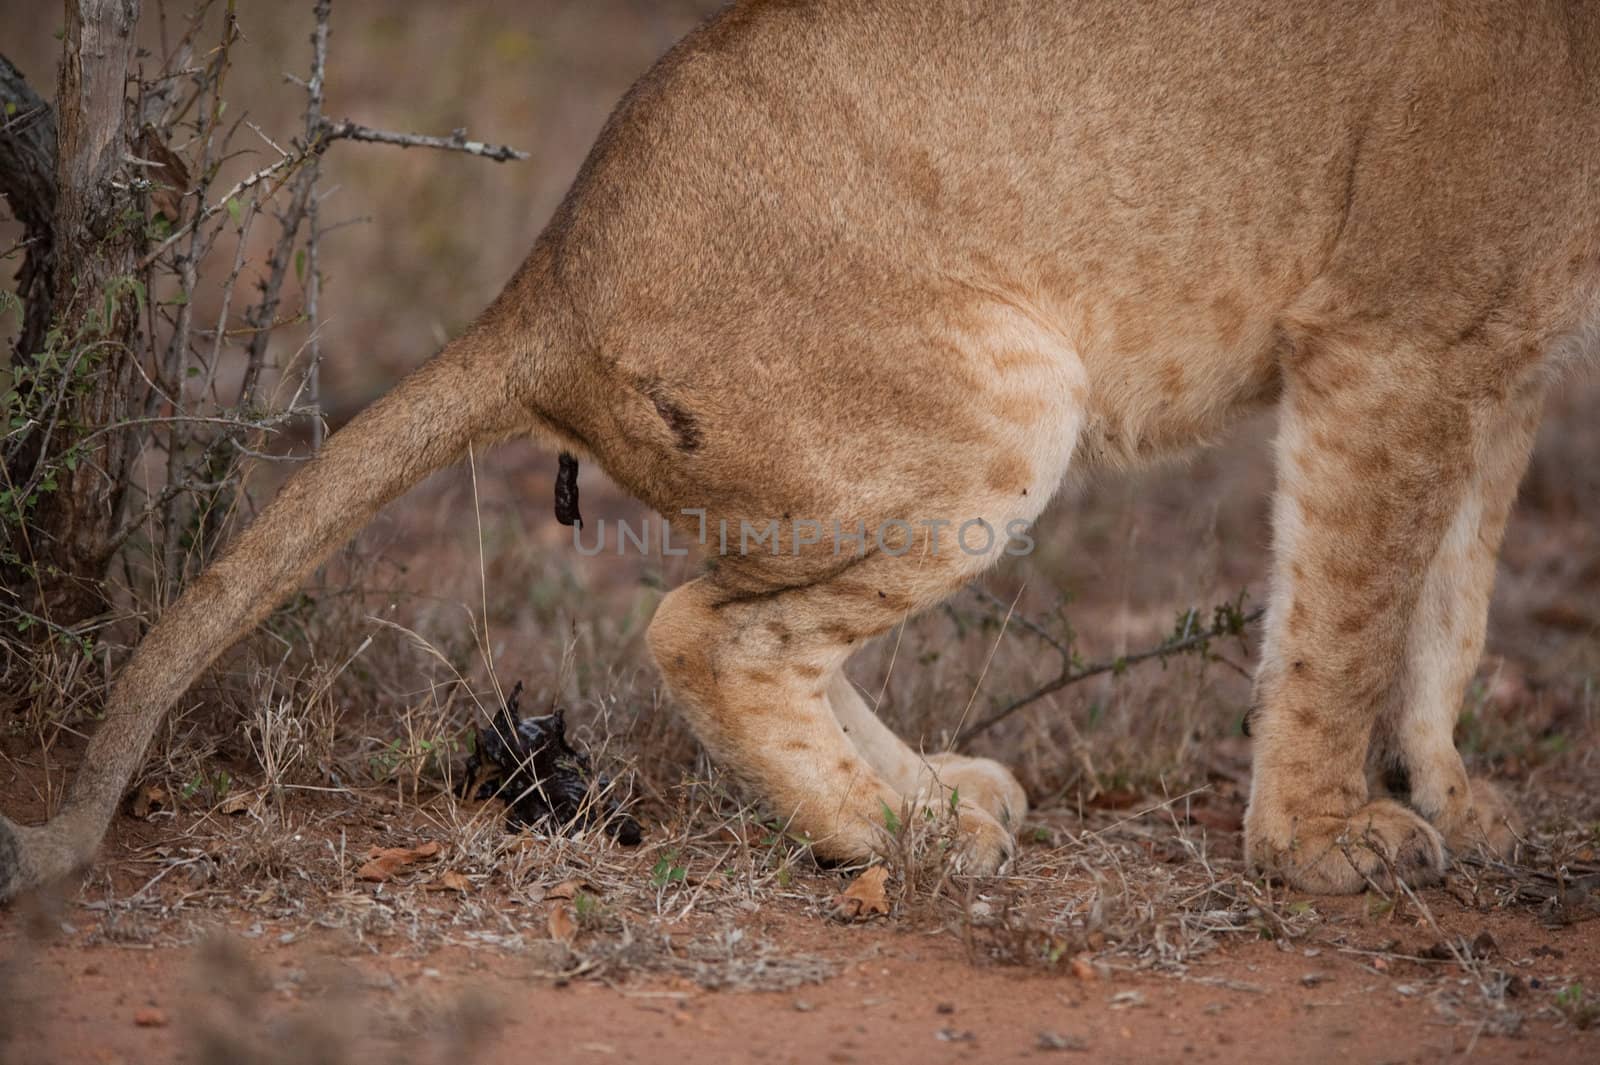 Lion defecating in the bush, South Africa